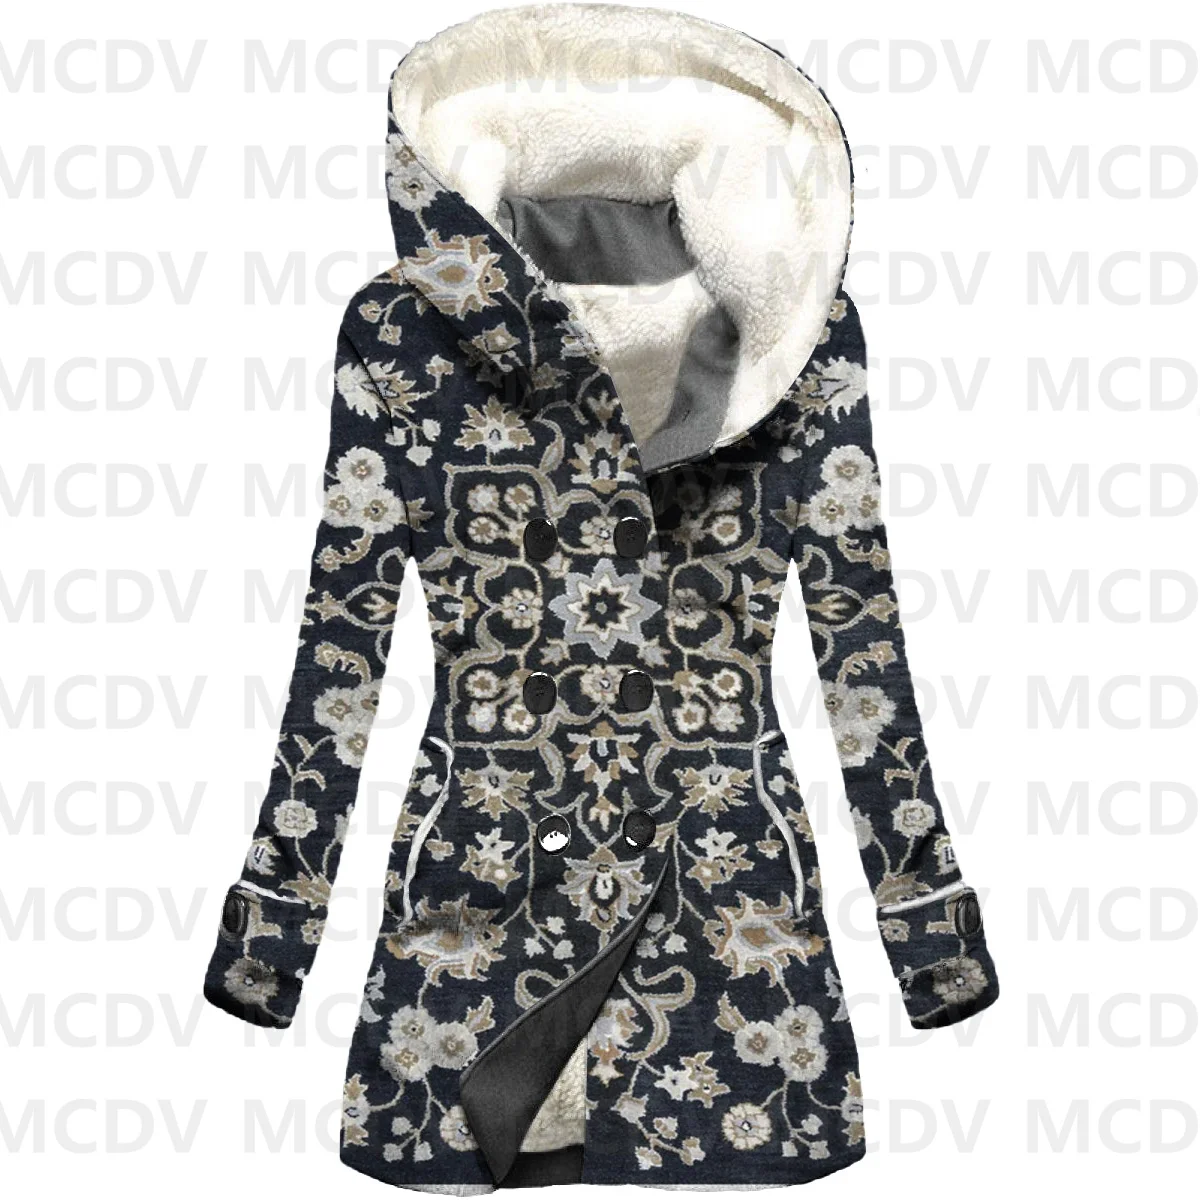 Retro Pattern Print Fleece Hooded Cloak Women Thick Warm Coat Women's Winter Warm Overcoat Casual Clothes retro batik scroll vintage half ripe rice paper hanging axis chinese traditional painting pattern calligraphy painting scroll